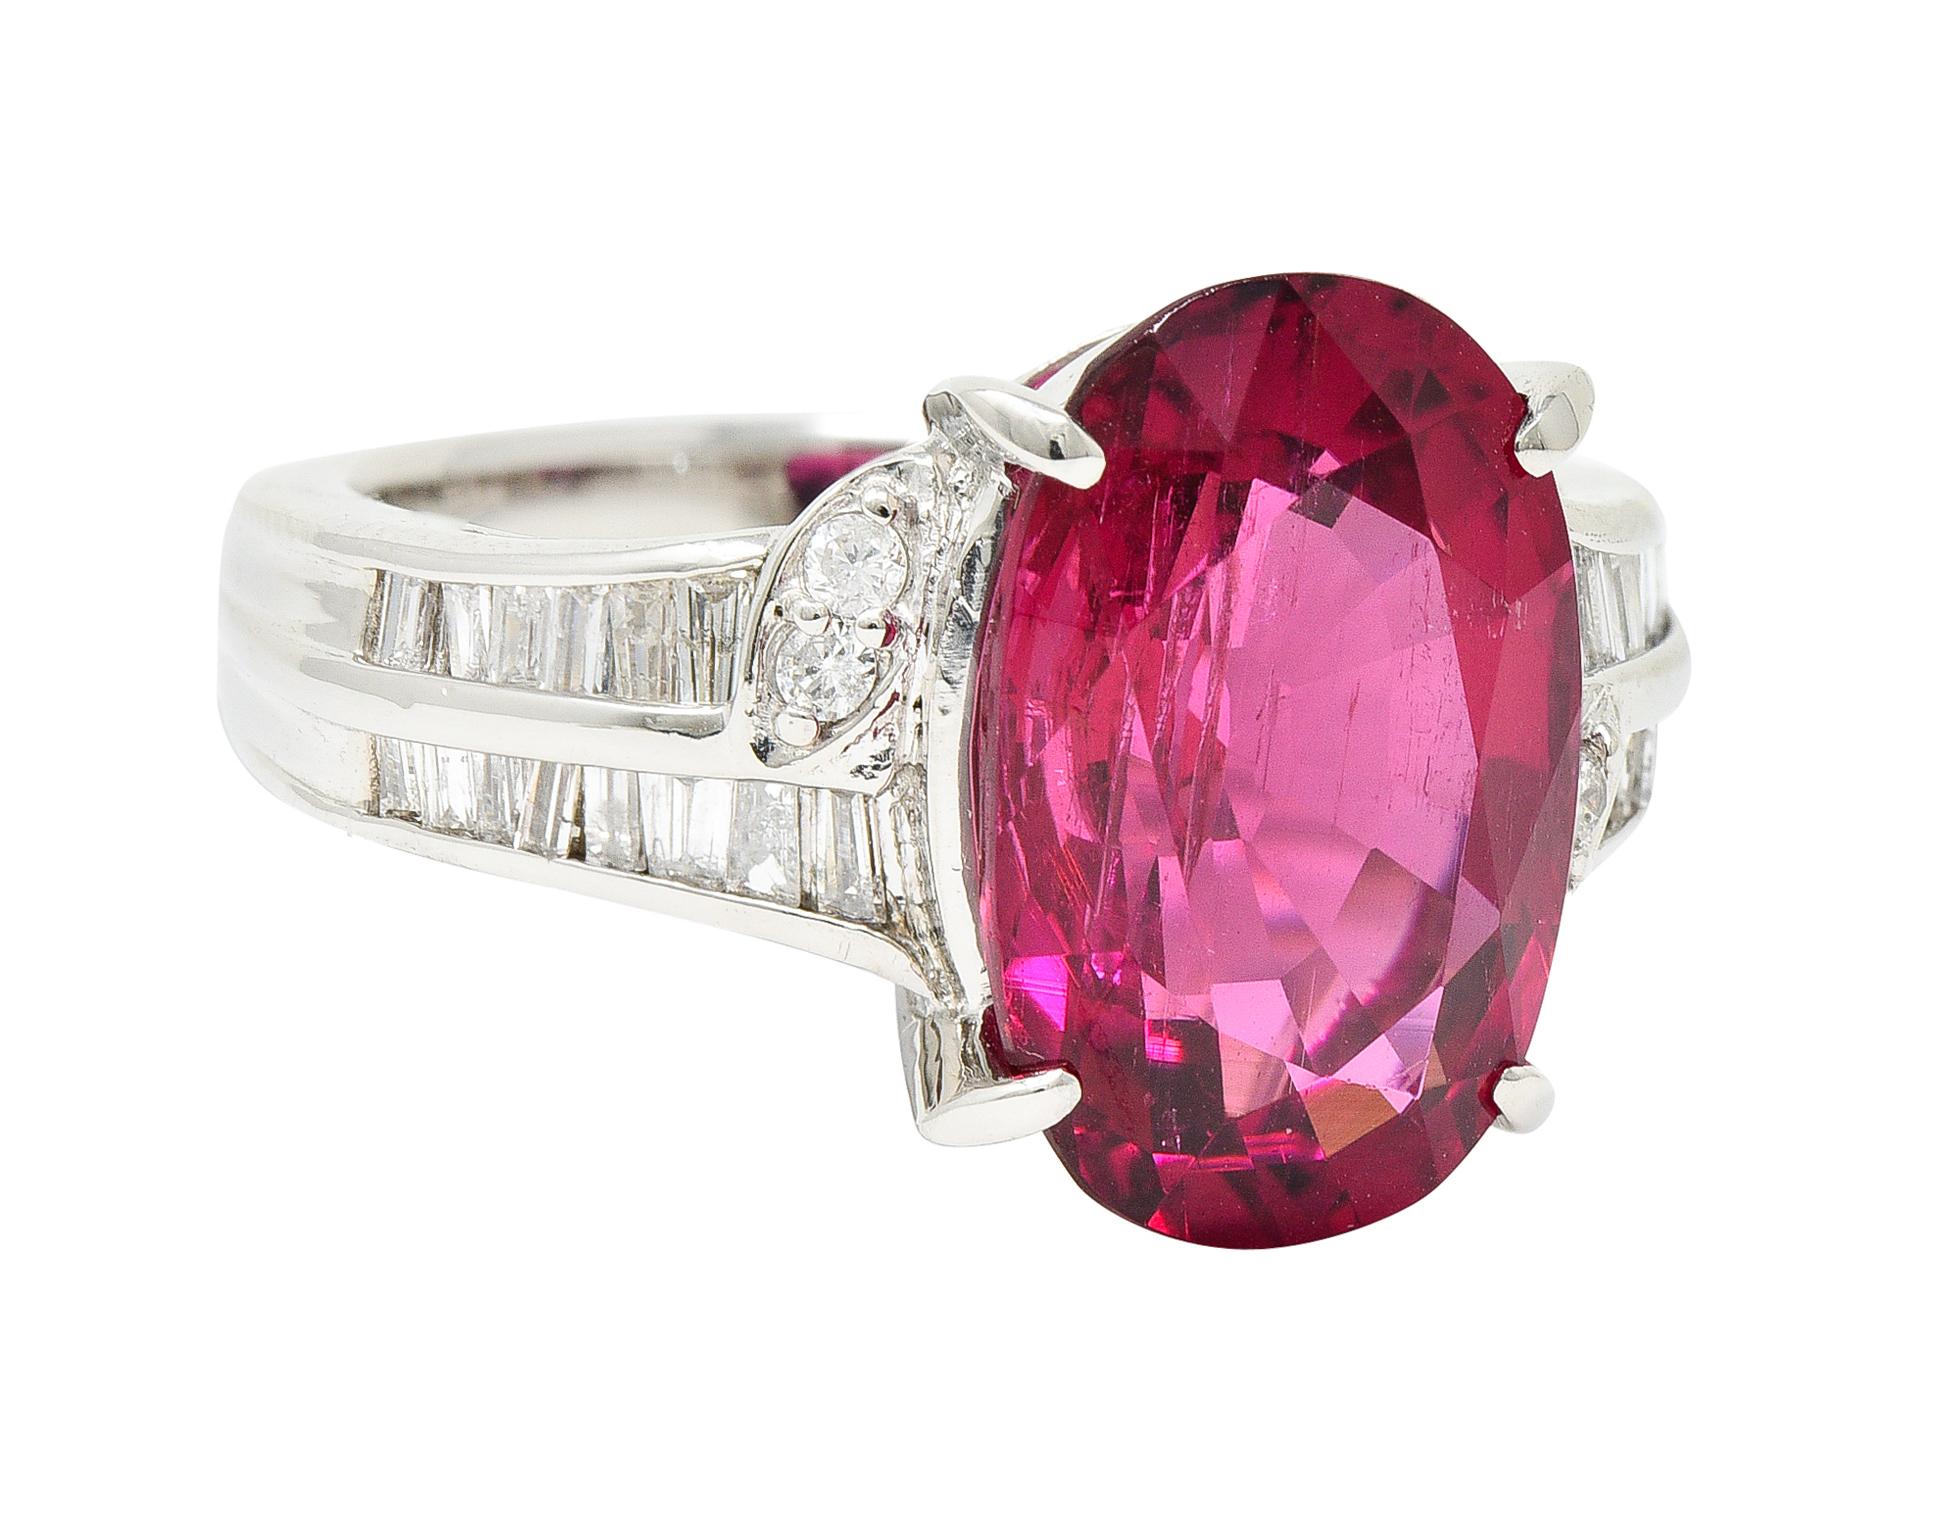 Featuring an oval cut rubellite tourmaline weighing 6.97 carats

Transparent with natural inclusions with strongly pinkish red in color

Talon set and flanked by channel set shoulders with a leaf motif

With tapered baguette and round brilliant cut